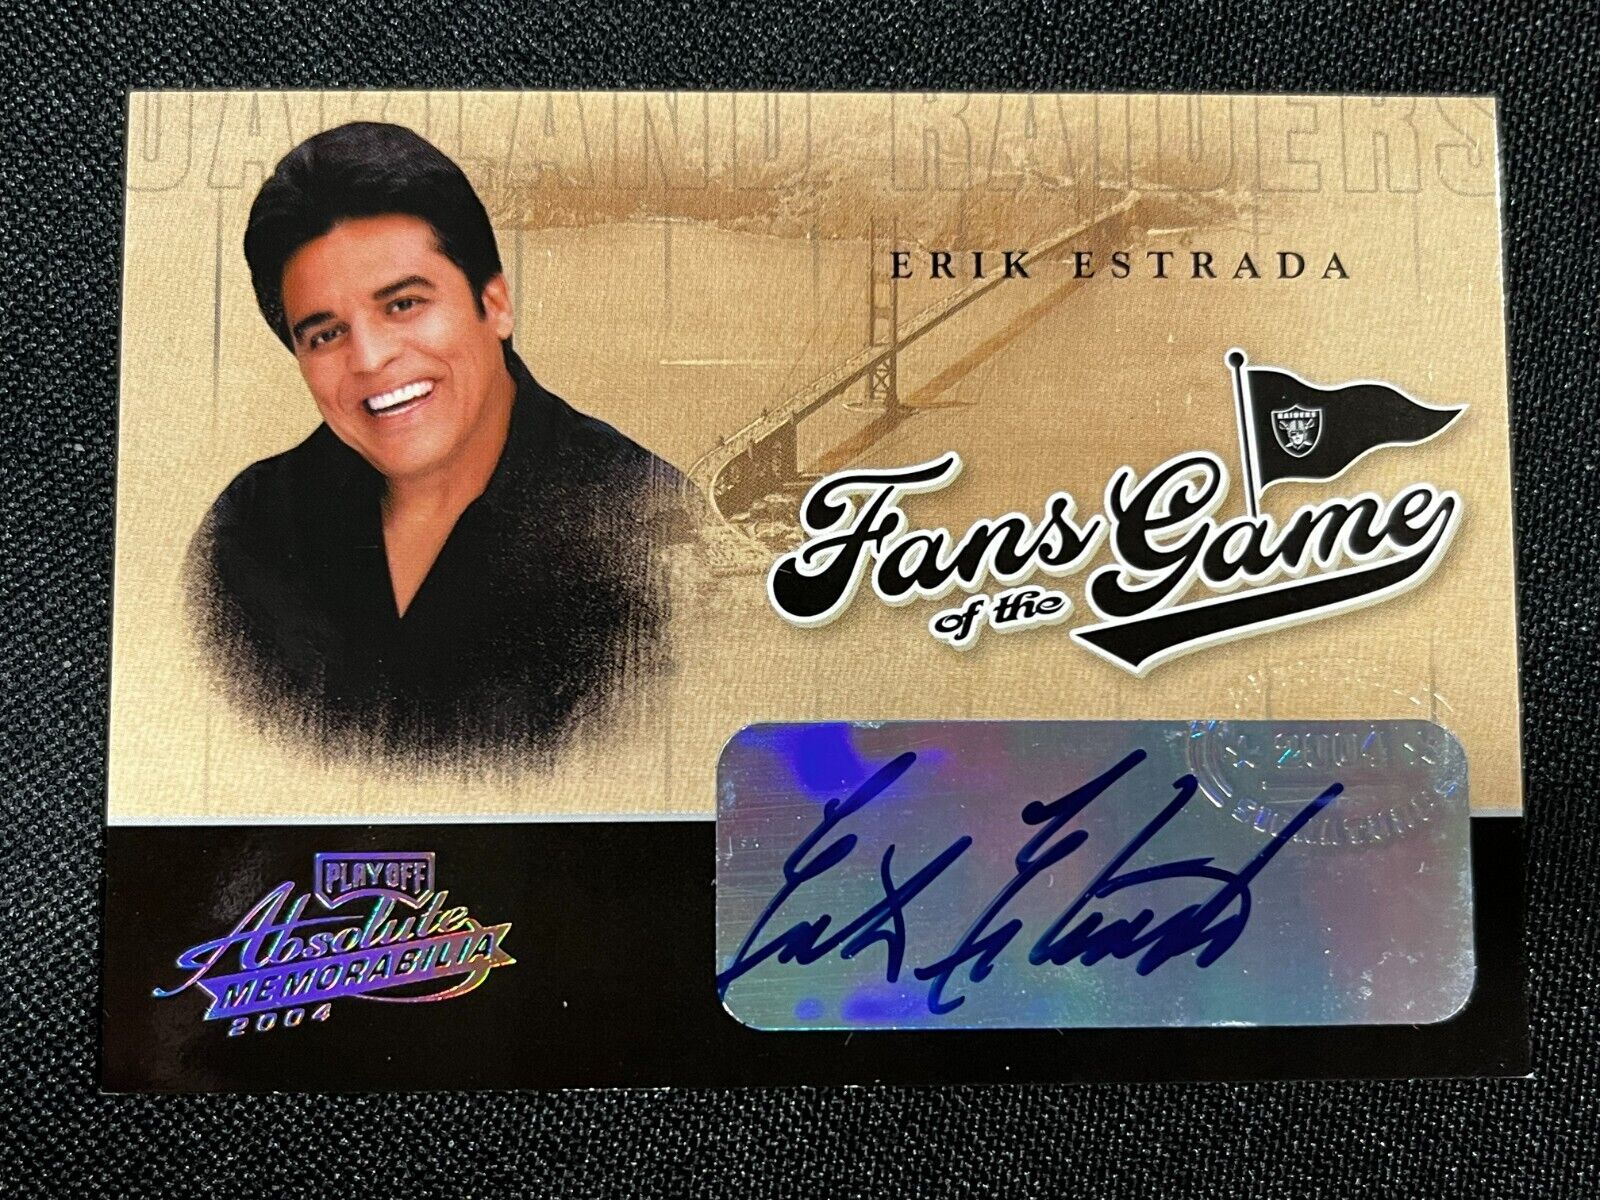 2004 Playoff Absolute Fans of Game Erik Estrada FG-1 #RD 138/300 Auto Card AA